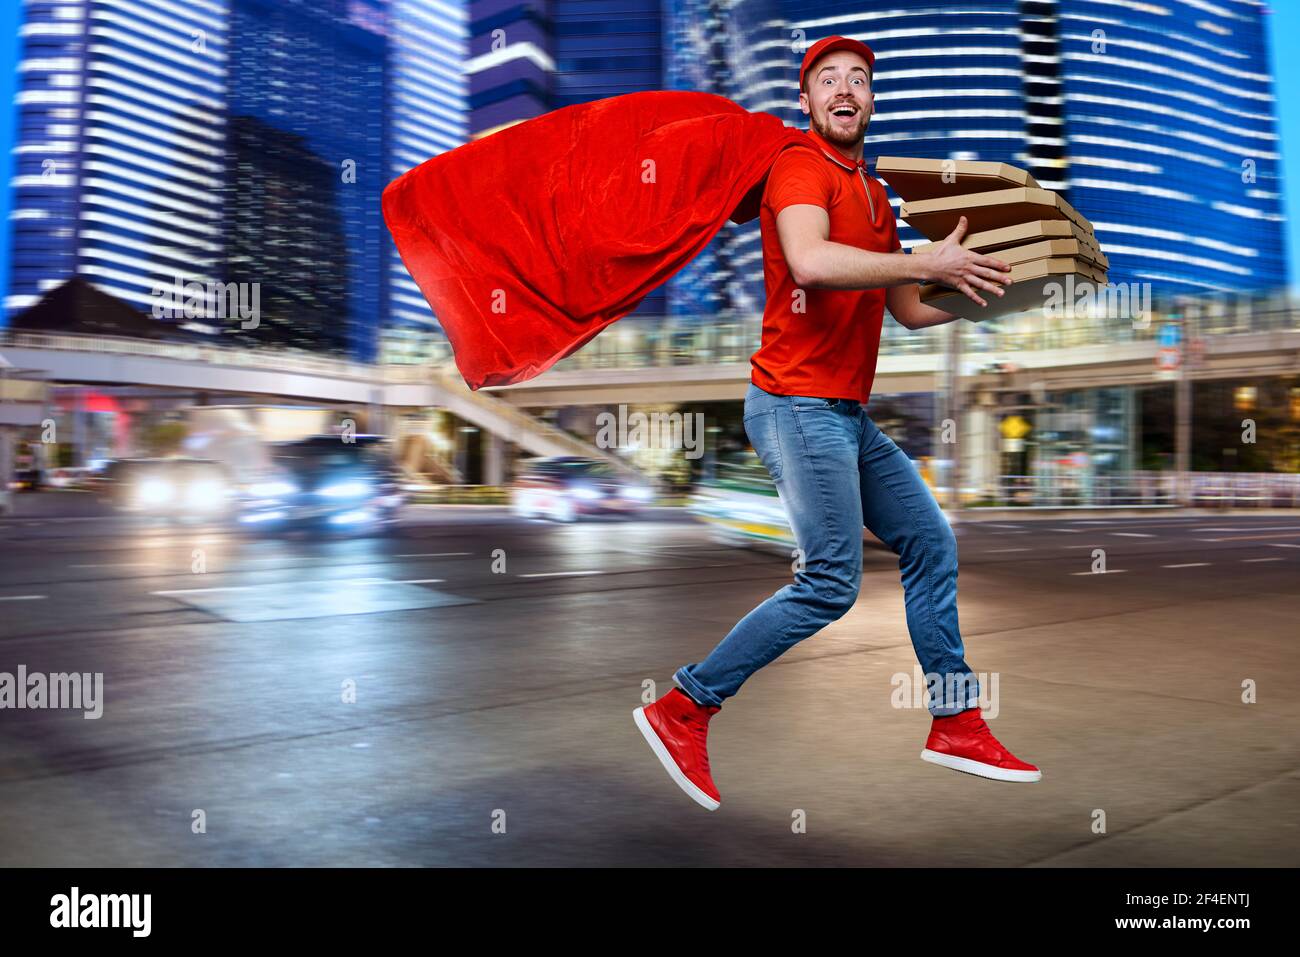 Deliveryman with pizzas acts like a powerful superhero. Concept of success and guarantee on shipment. Stock Photo